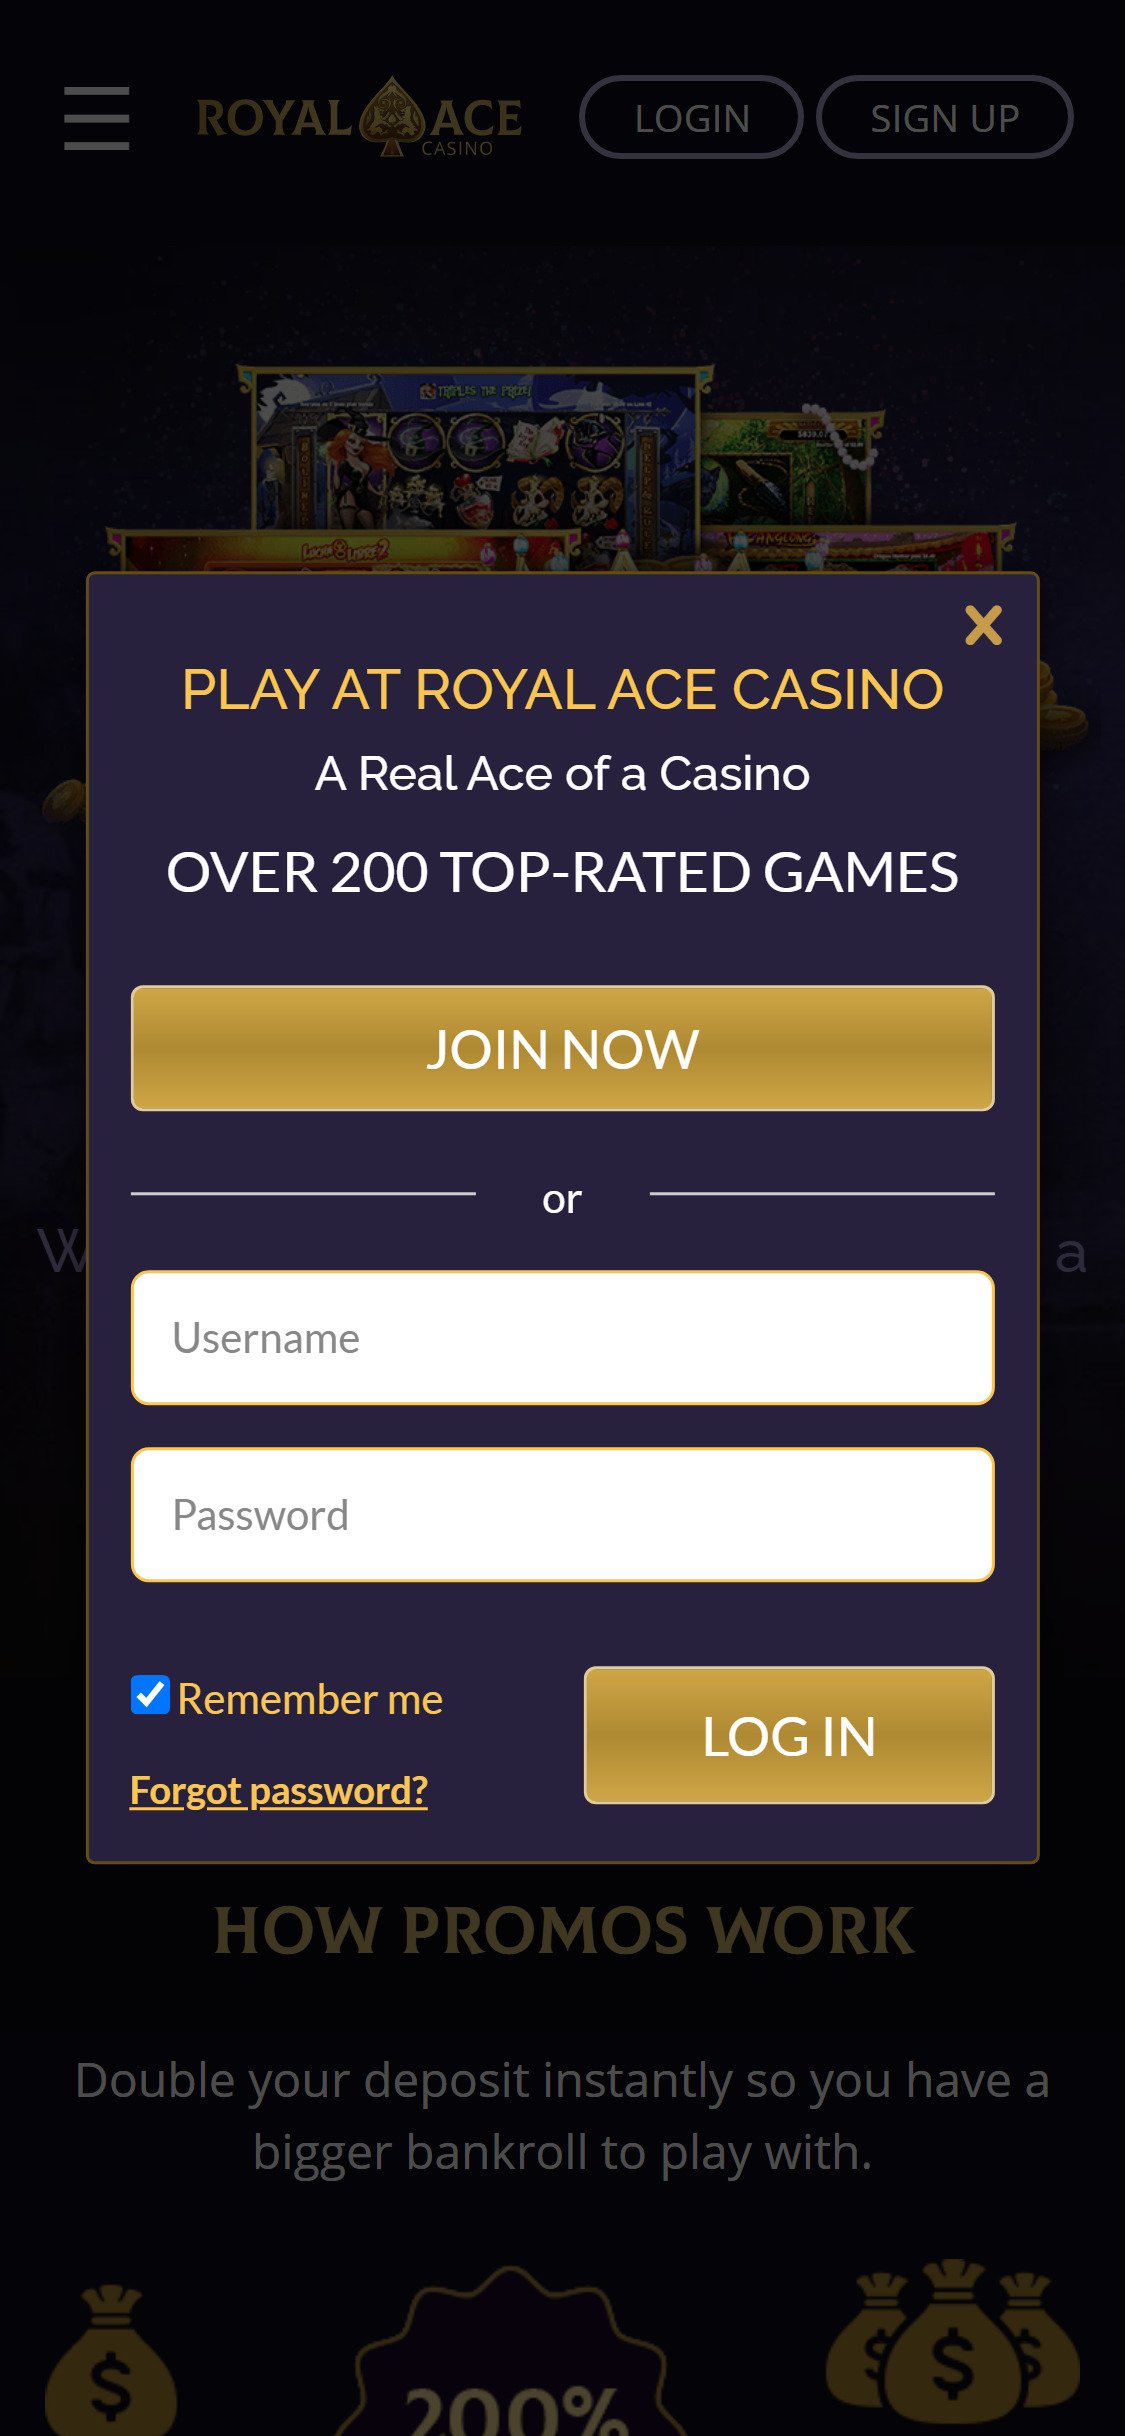 Royal Ace Casino Mobile Login Review